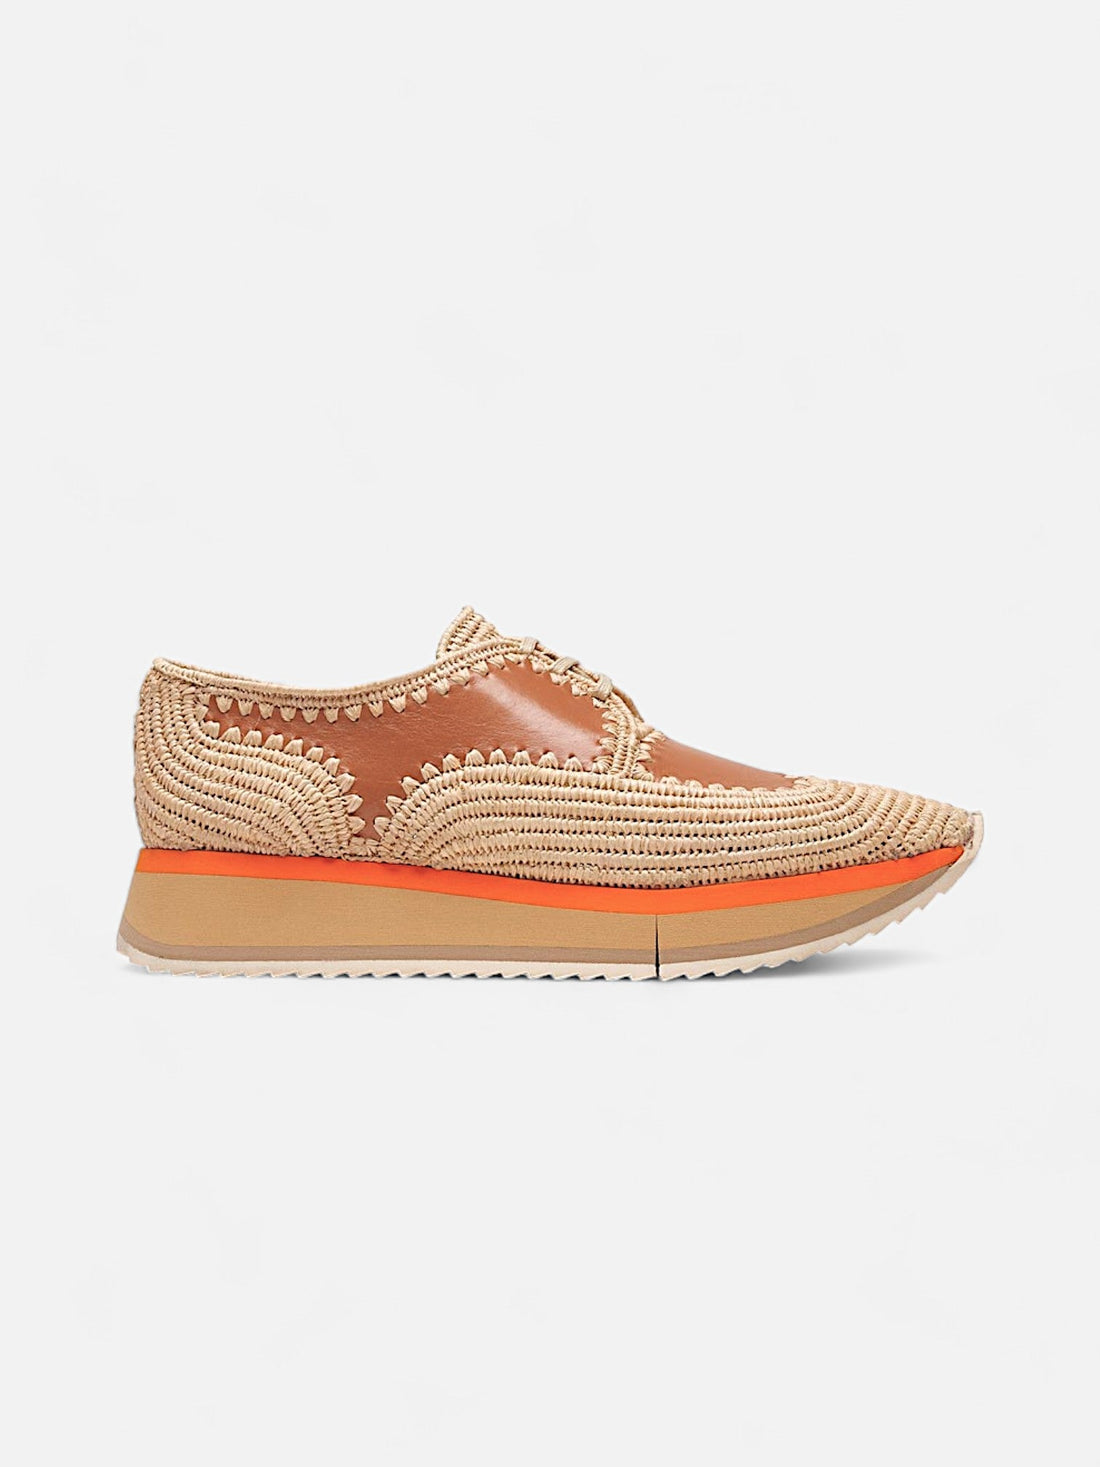 SNEAKERS - ONEIL sneakers, calfskin straw and brown - 3606063643214 - Clergerie Paris - Europe